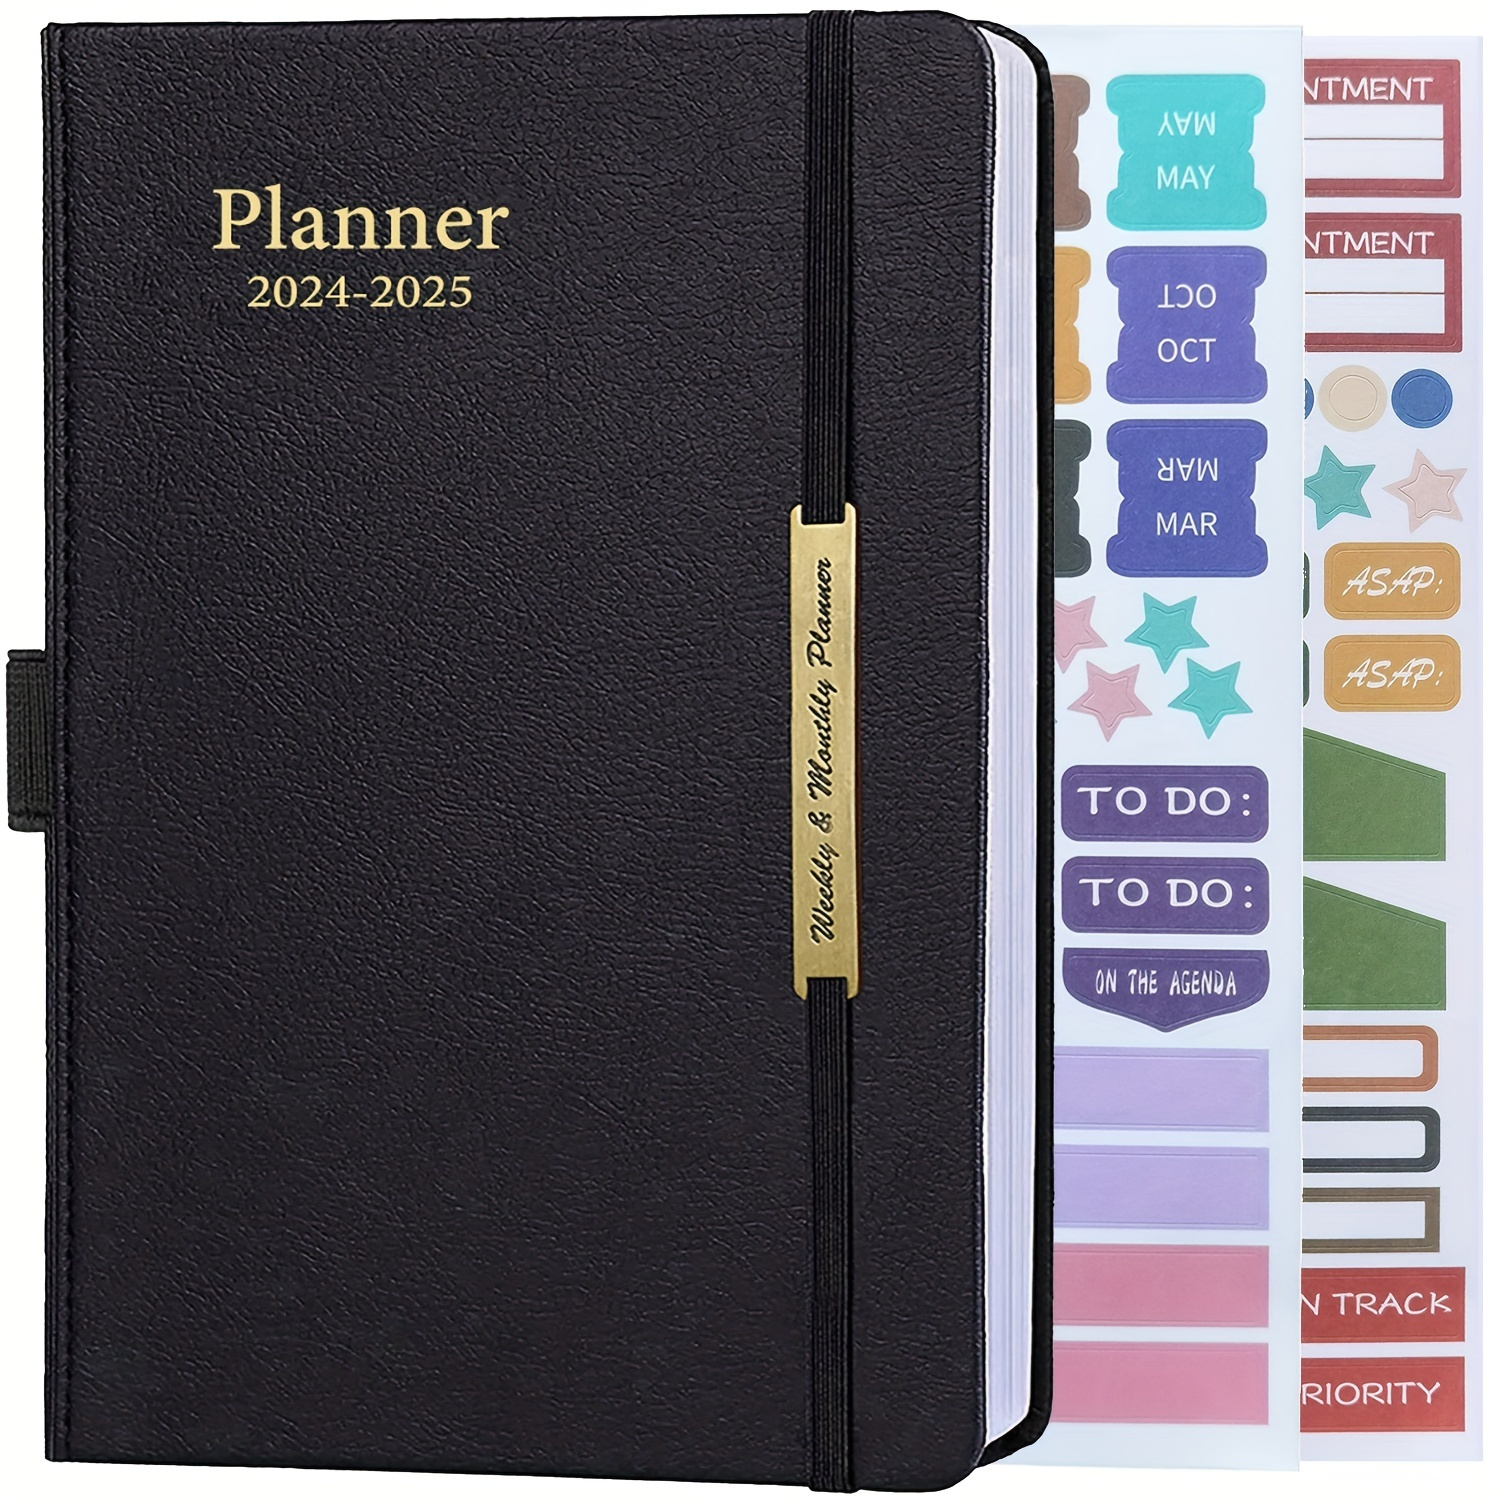 Diary 2024-2025 - 18 Month Diary from Jan. 2024 to Mid Year Jun.2025, A5  Week to View Diary, Weekly & Month Planner with Leather Cover, Pen Loop